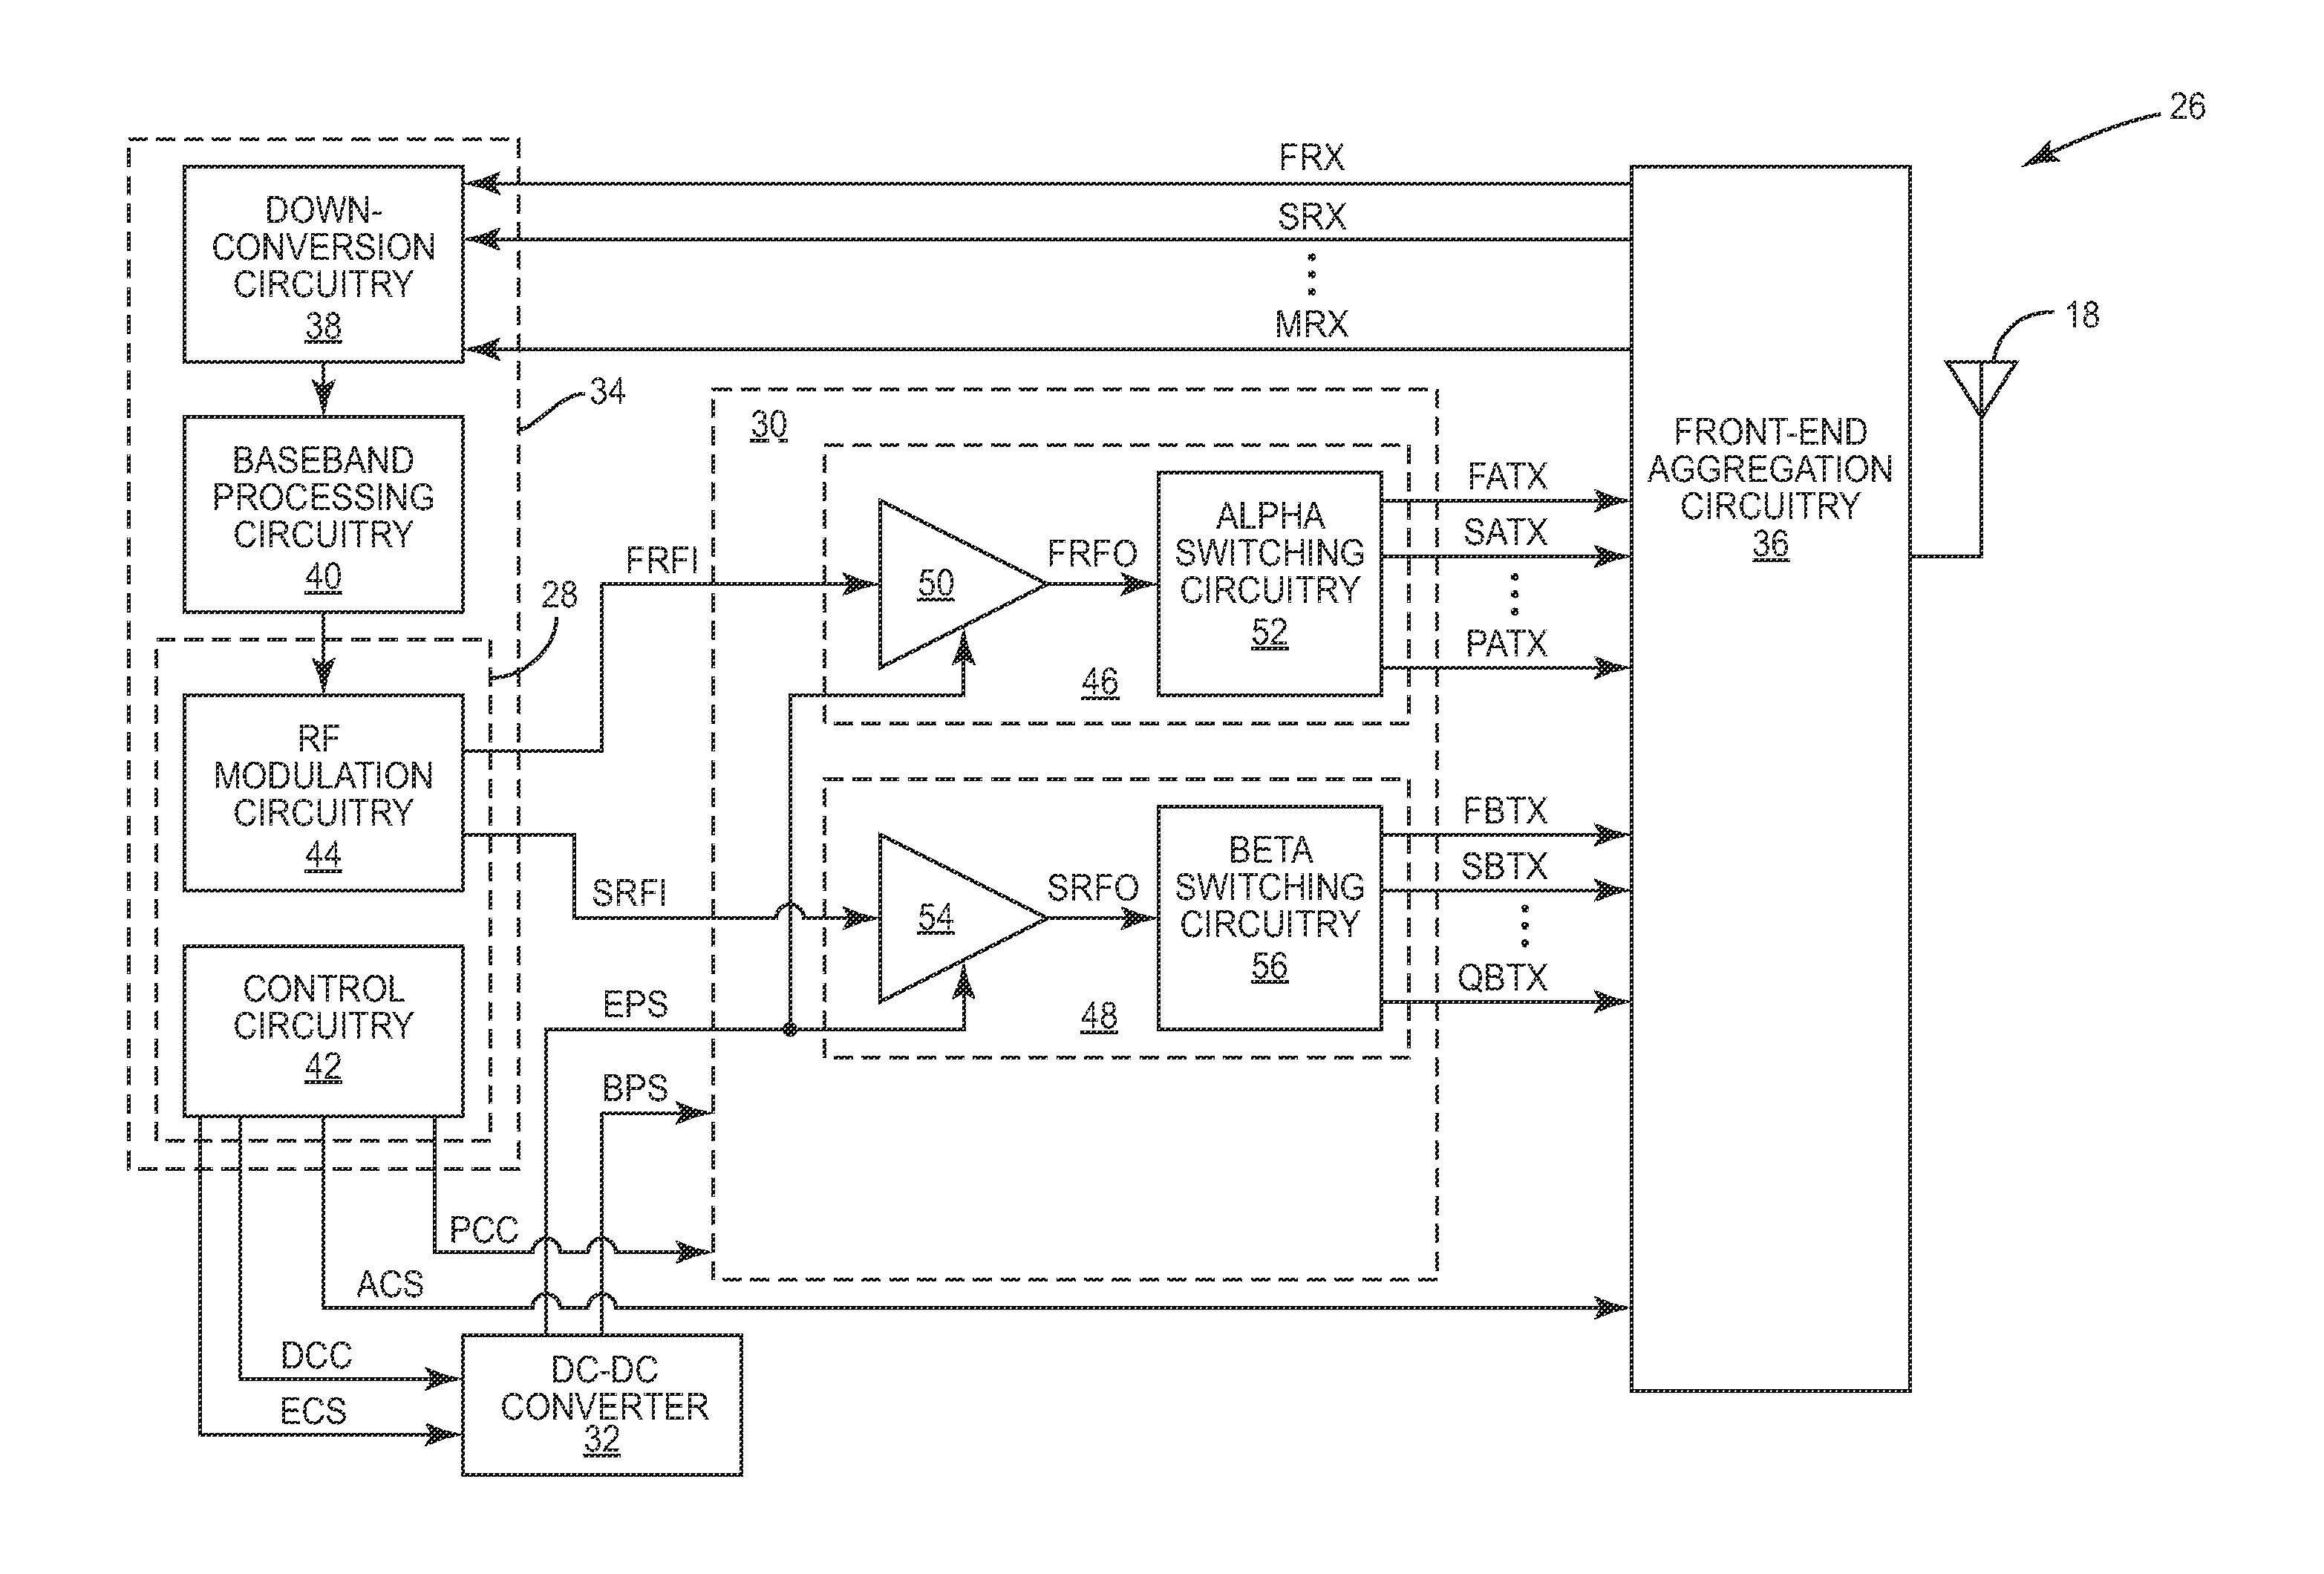 Temperature correcting an envelope power supply signal for RF pa circuitry